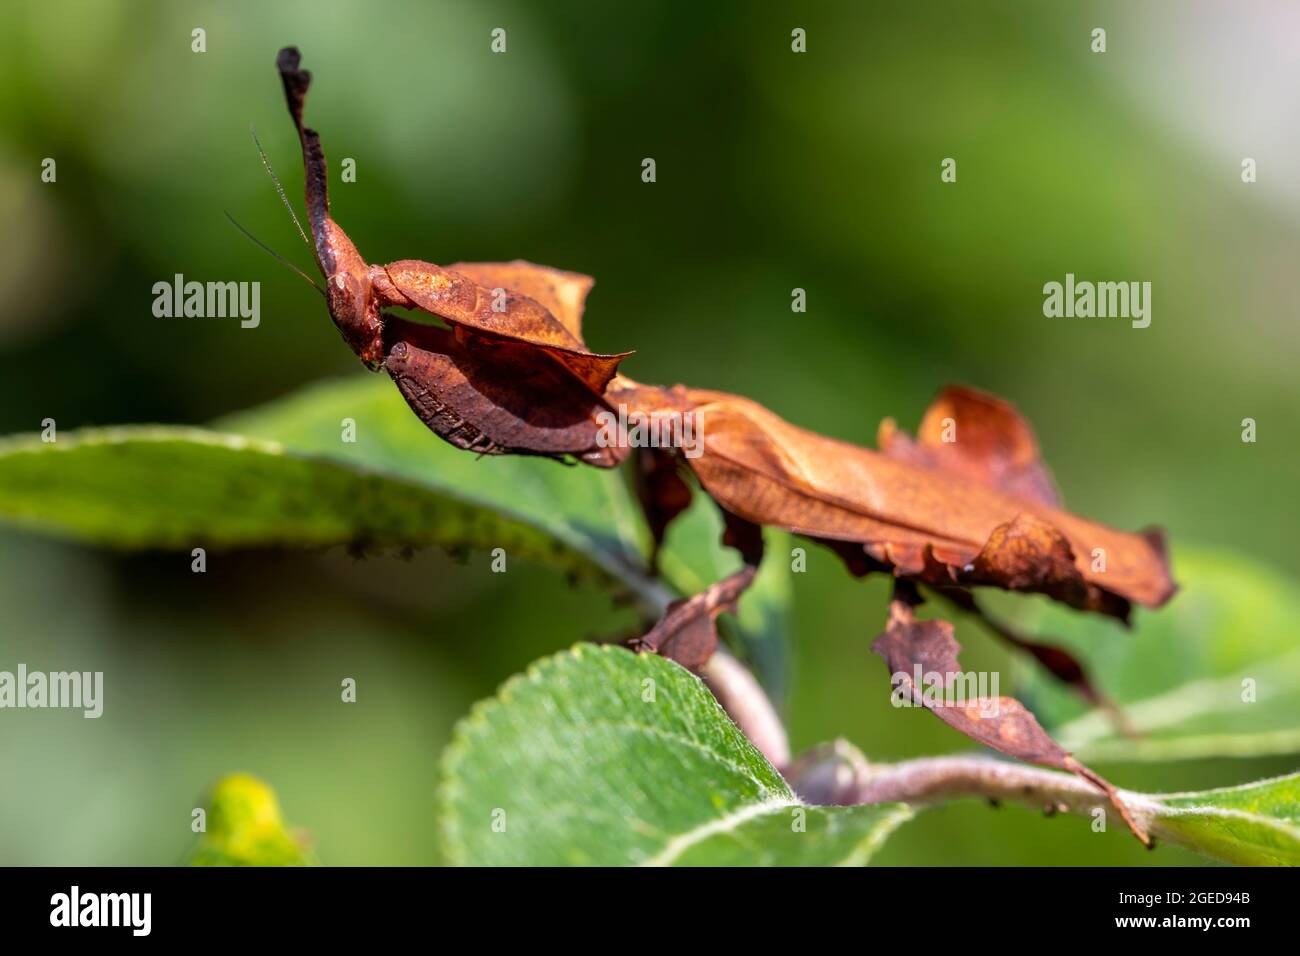 A side porofile of a Ghost praying mantis, on a leaf. Stock Photo